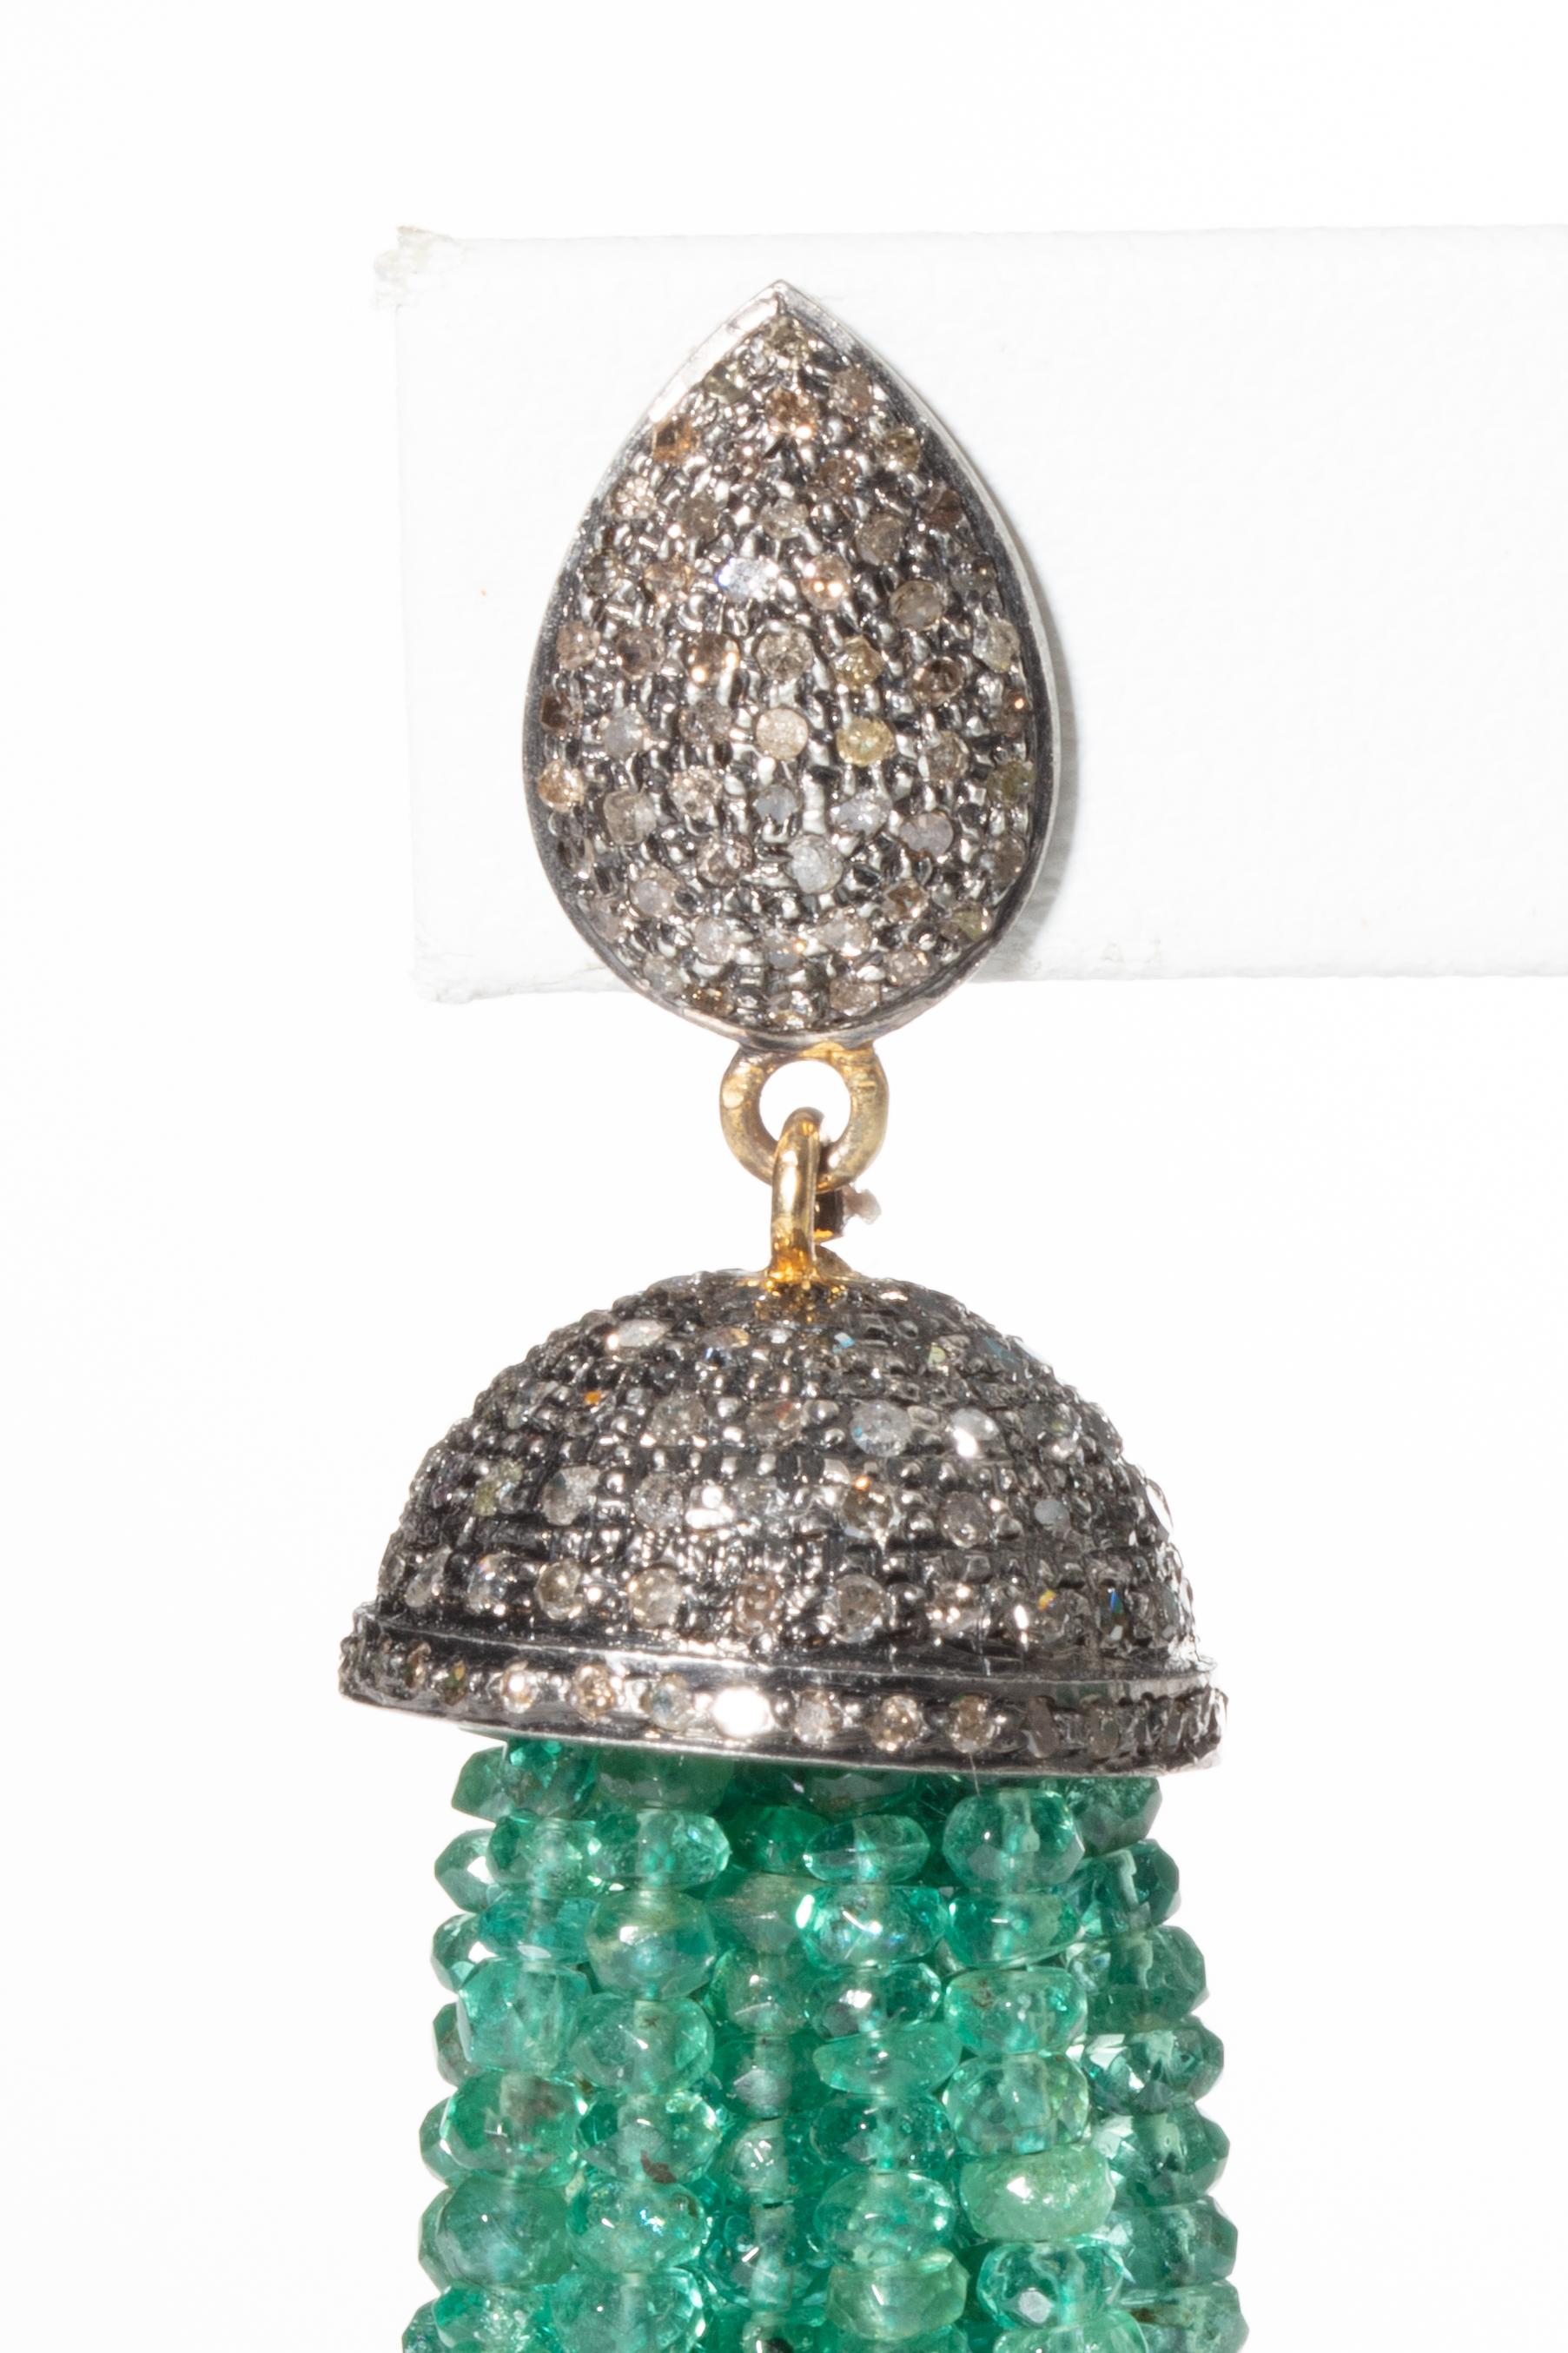 Pair of faceted emerald tassel earrings with pave`-set diamonds on the end cap and top of the post.  18K gold post for pierced ears.  Carat weight of diamonds is 2.84.  The faceted Colombian emeralds are 192 carats.  Stunning.